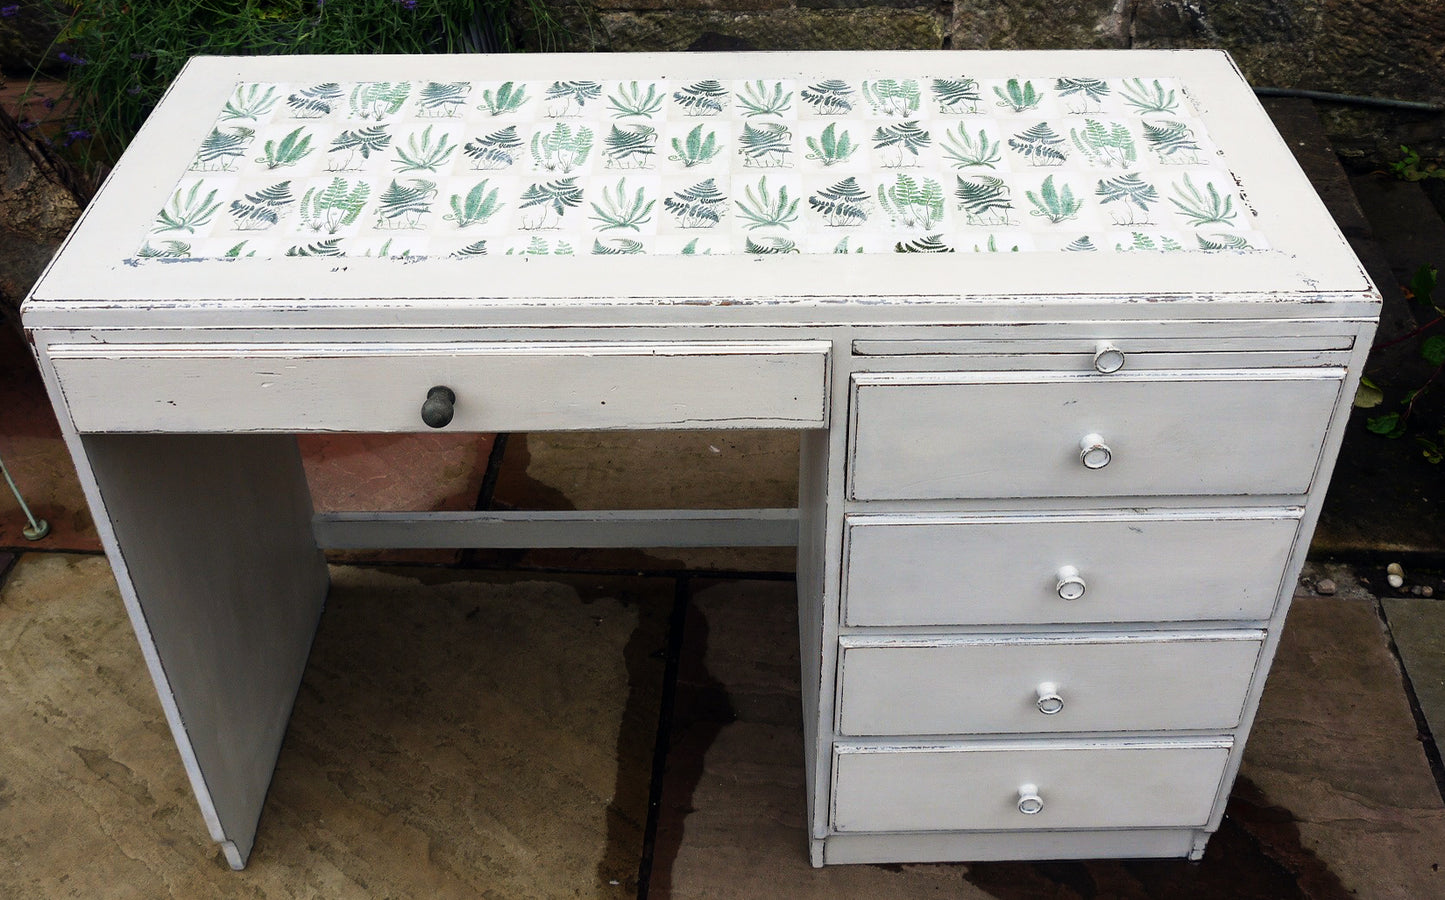 Vintage writing desk painted in chippy miss mustard seed milk paint grain sack grey layered with Bergere and a botanical fern design